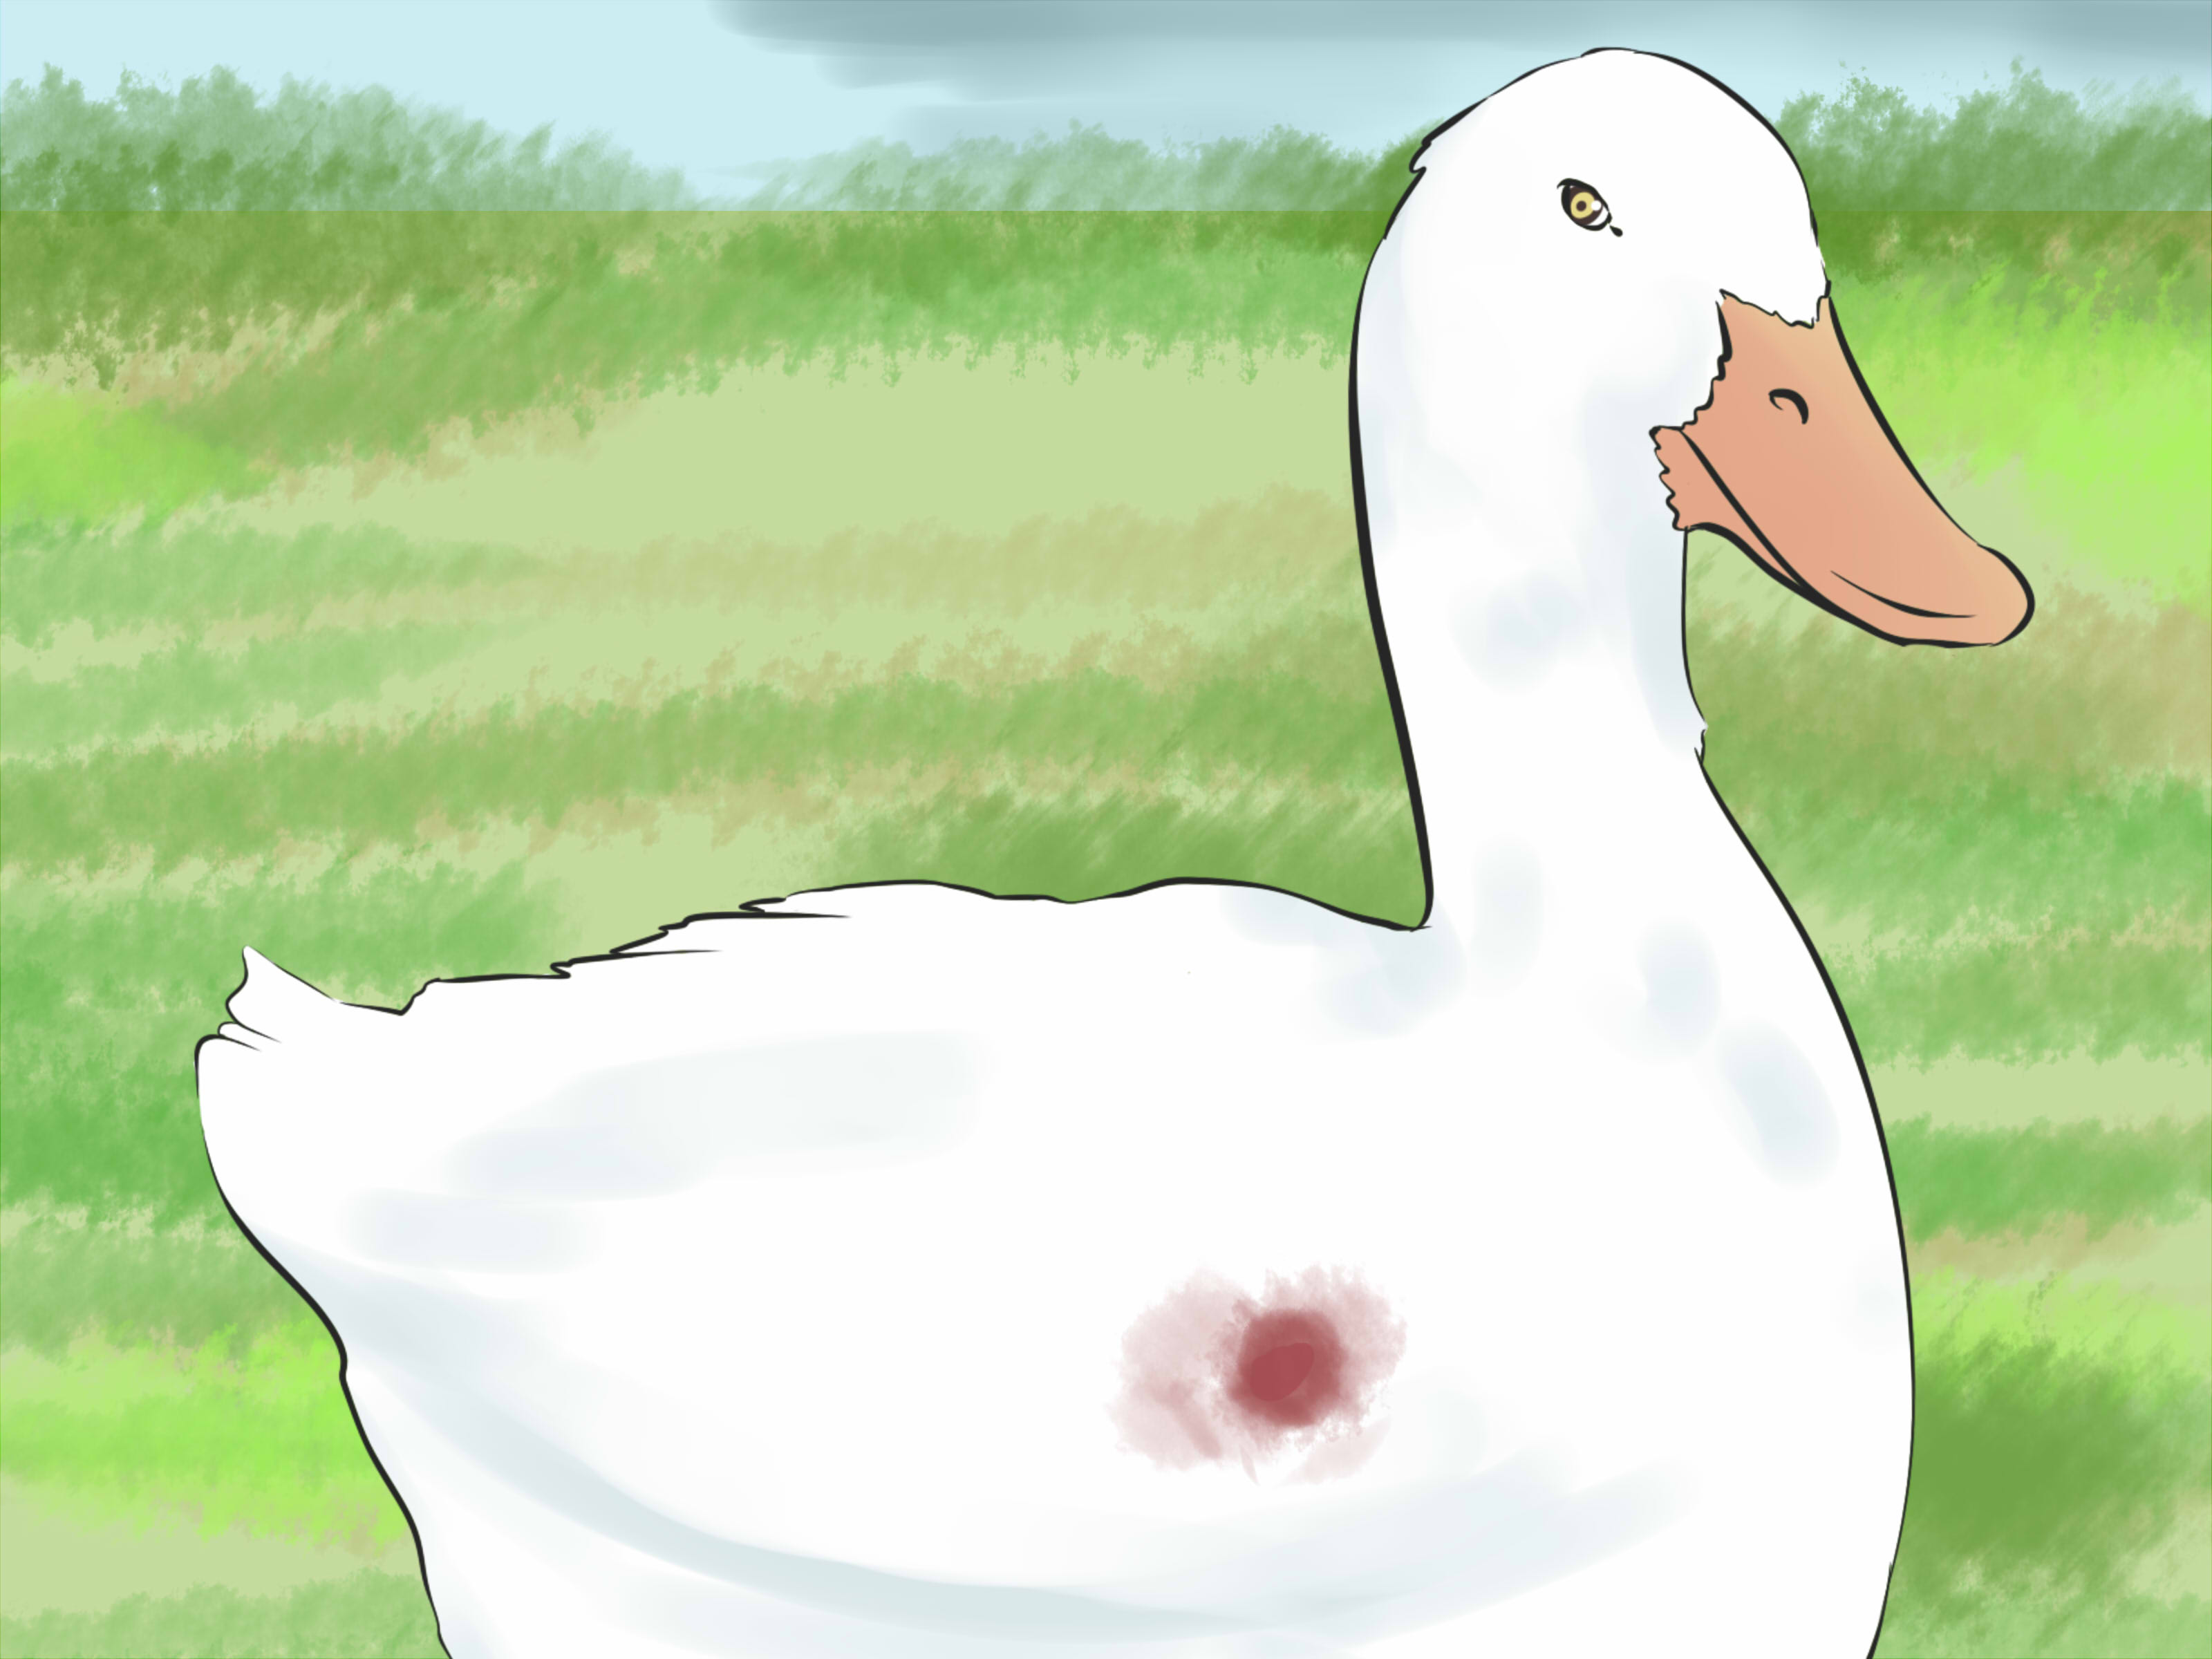 4 Ways to Take Care of Ducks - wikiHow